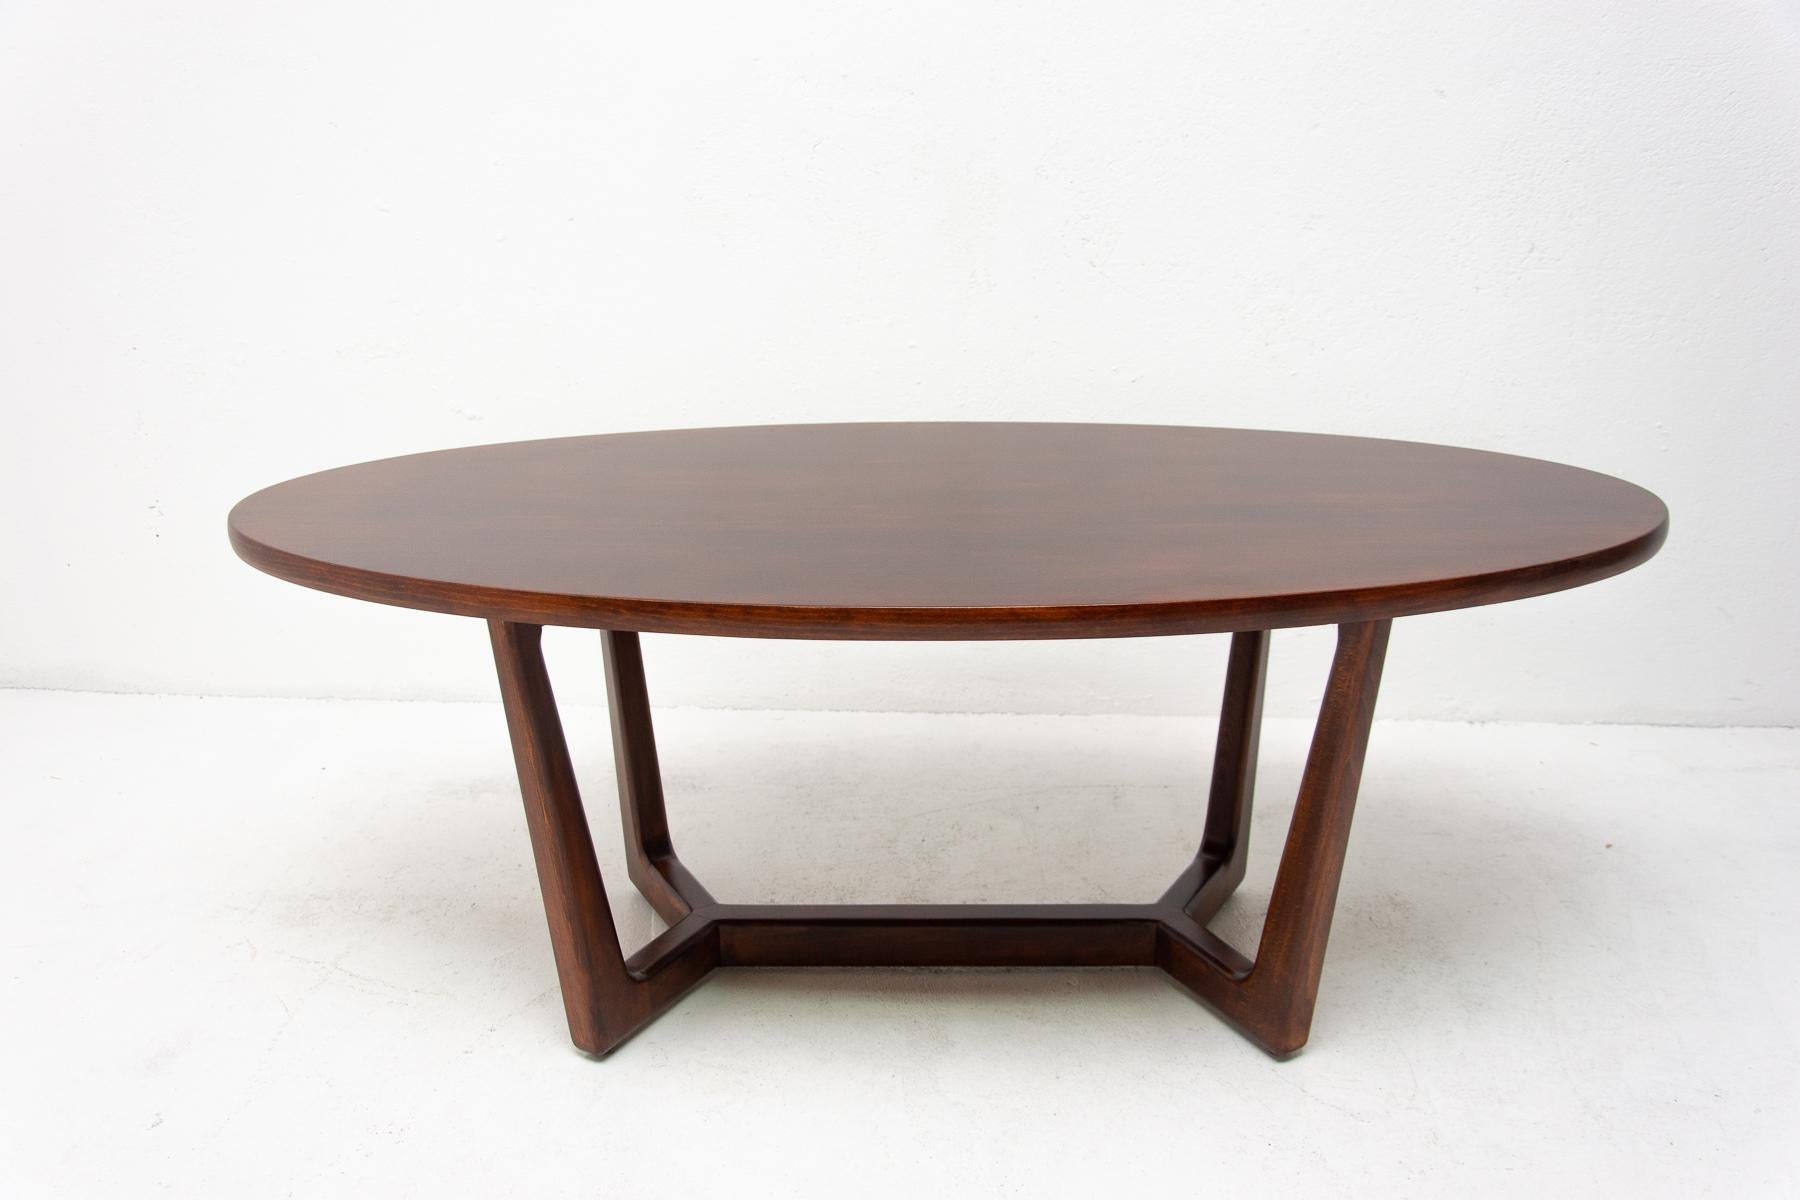 Vintage Oval Coffee Table, Czechoslovakia, 1970s In Excellent Condition In Prague 8, CZ